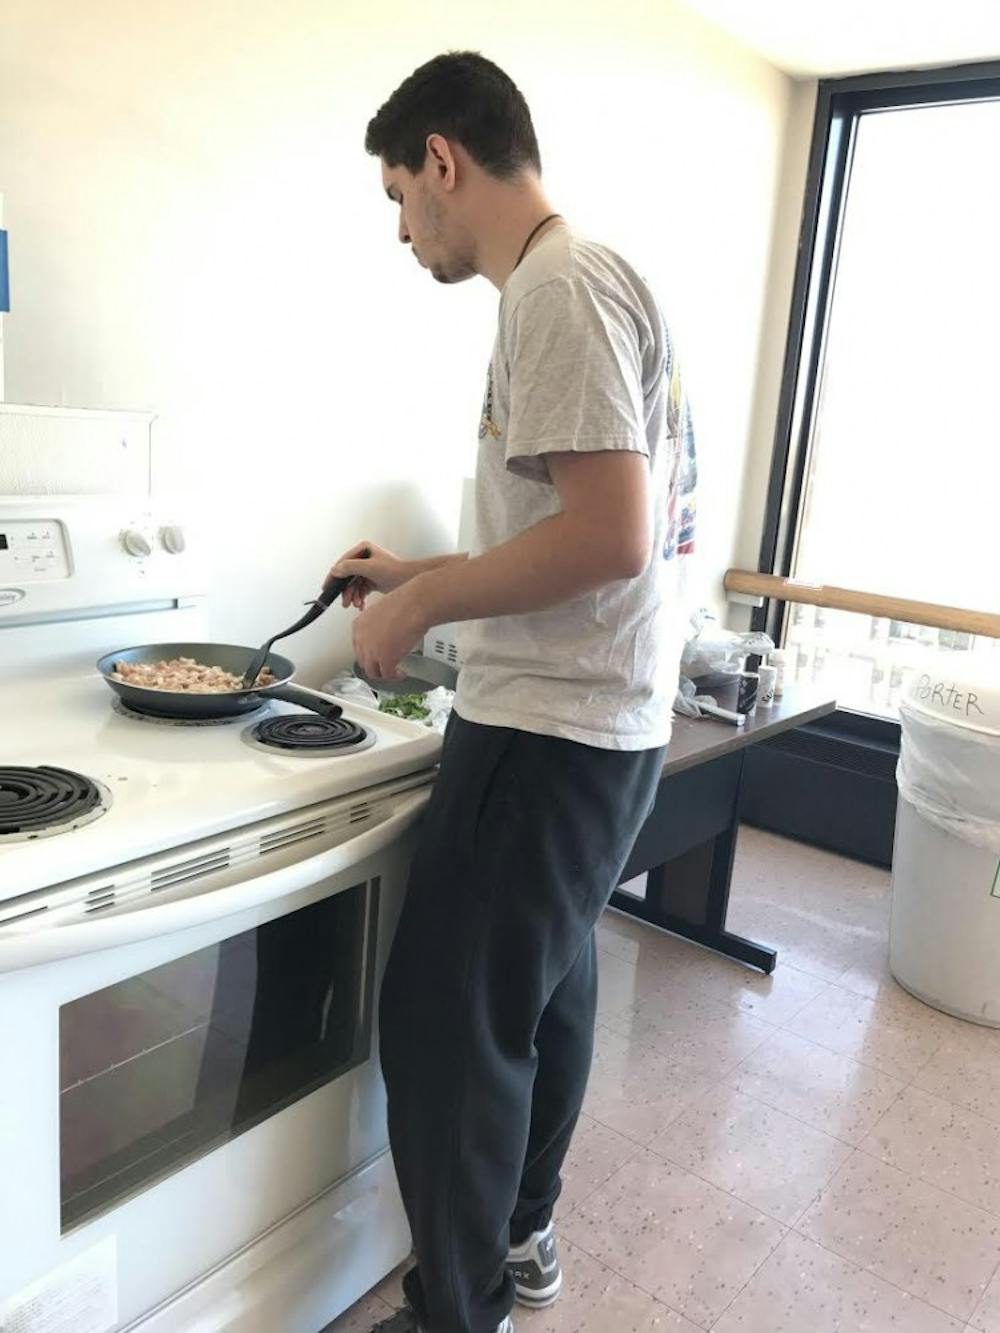 <p>Gabriel Periera cooks at the stove in Porter Hall’s kitchen. Periera was born in Uruguay, and enjoys cooking traditional Uruguayan food.</p>